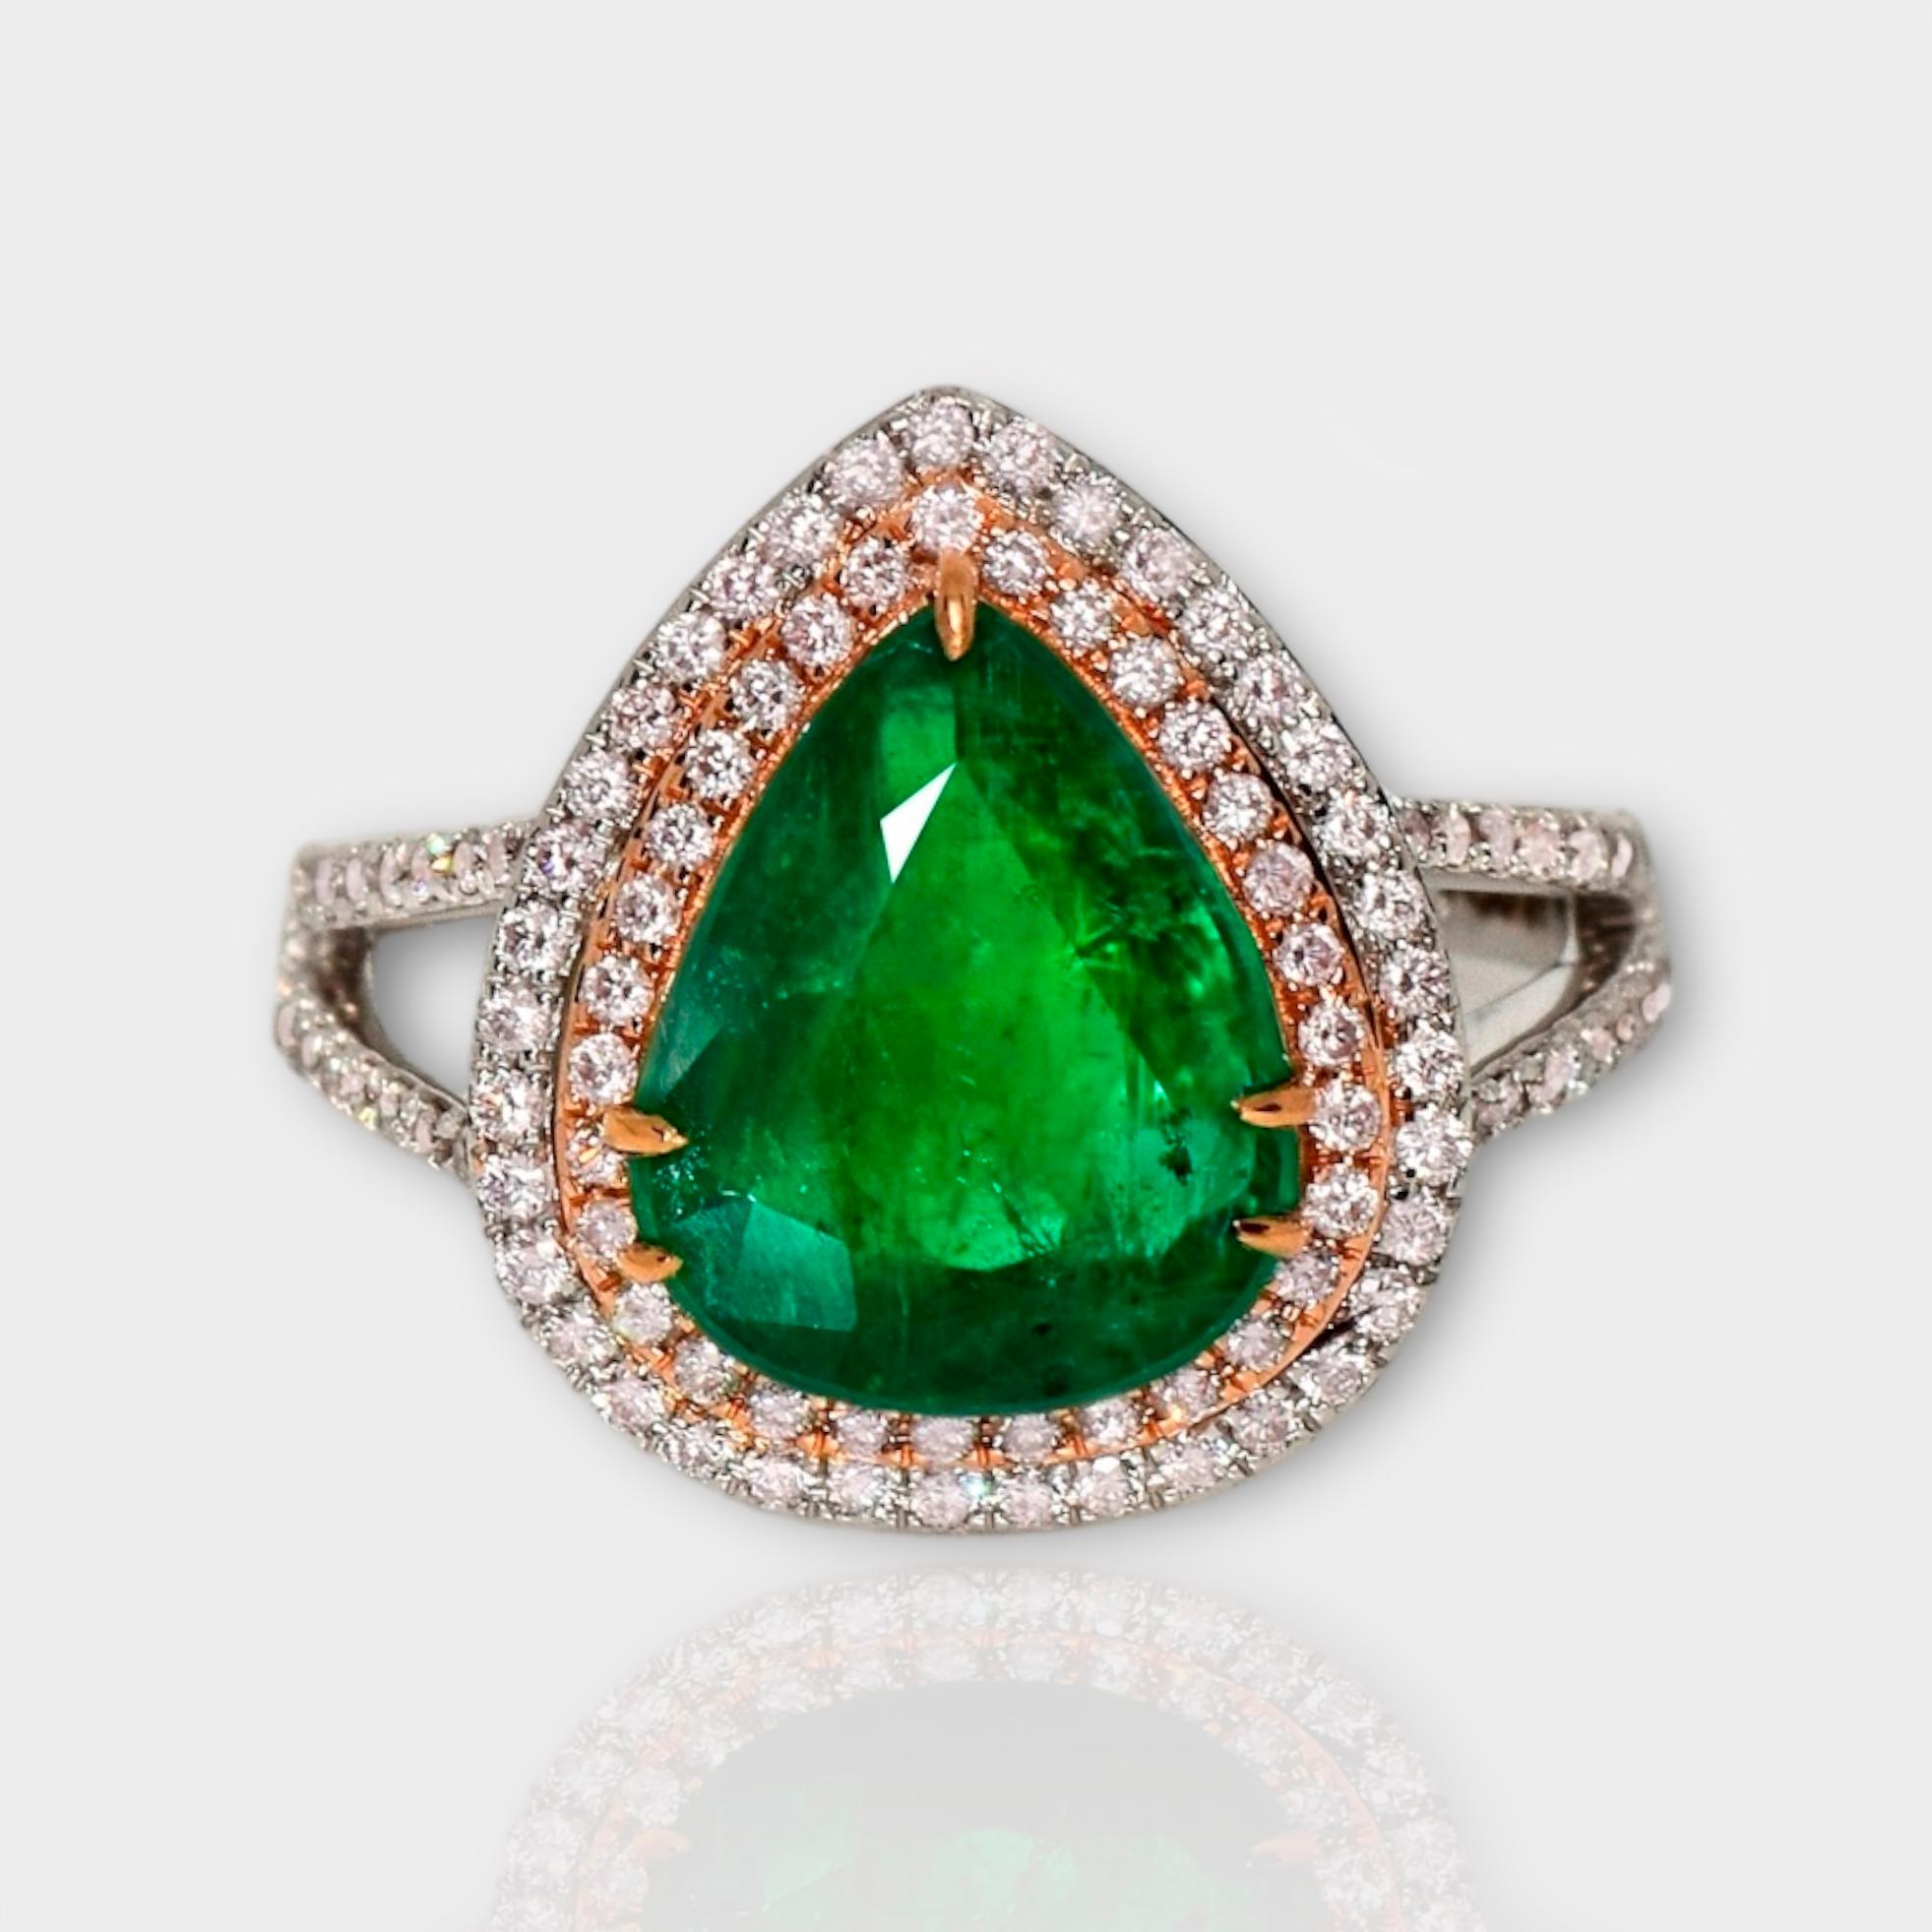 **IGI 18K Dual-color Gold 3.89 ct Emerald&Pink Diamonds Antique Art Deco Style Engagement Ring** 

An IGI-certified natural Zambia green emerald weighing 3.89 ct is set on an 18K dual-color gold arc deco design band with natural pink diamonds